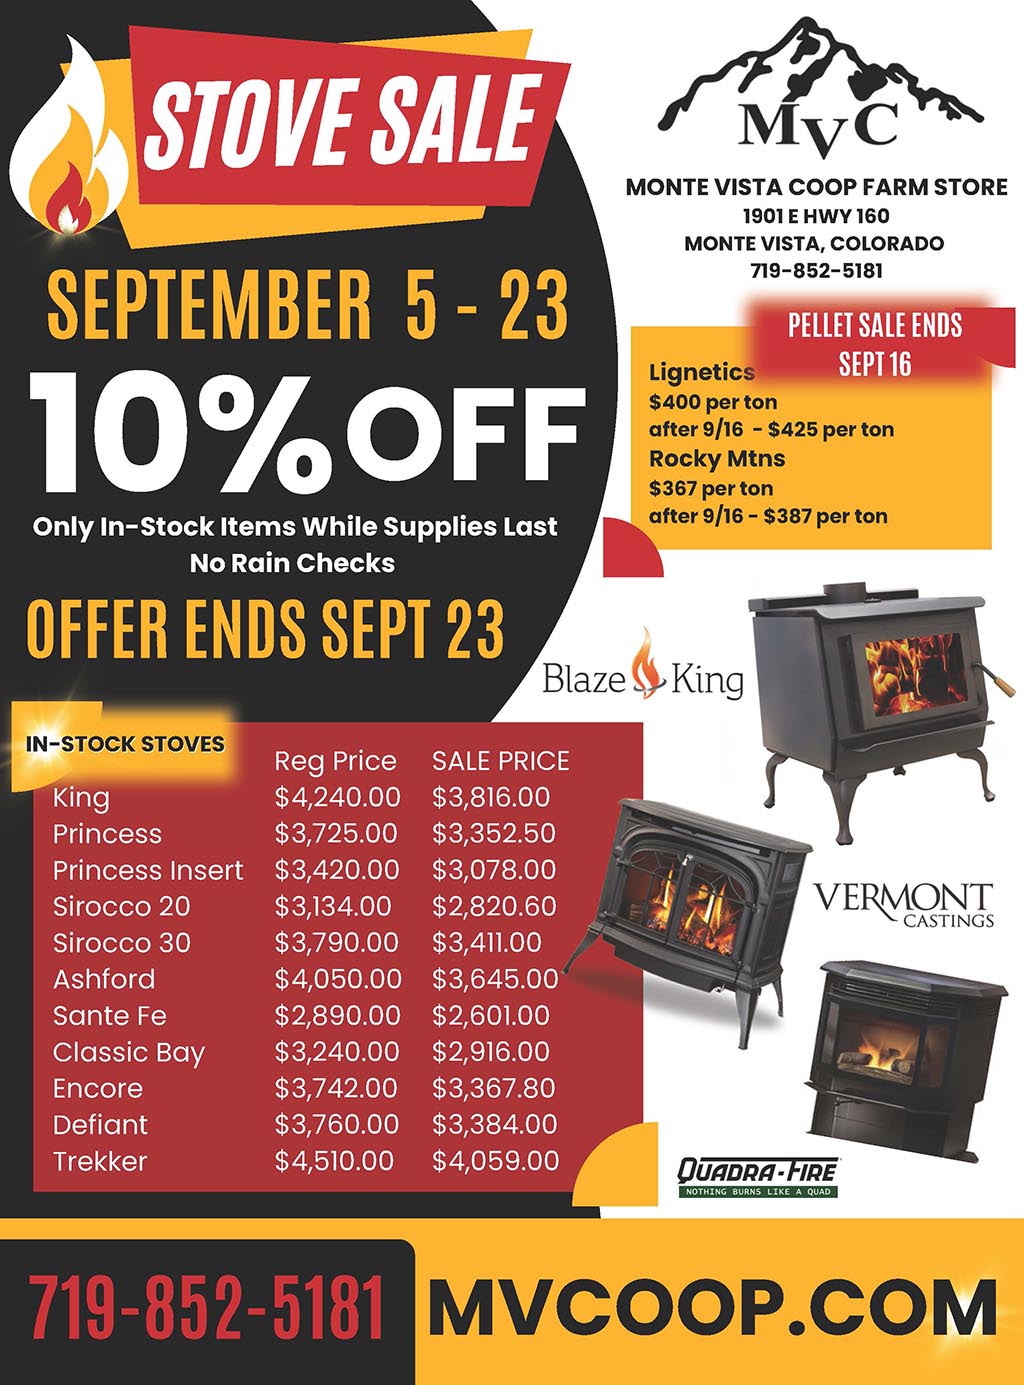 Updated Stove Sale Flyer